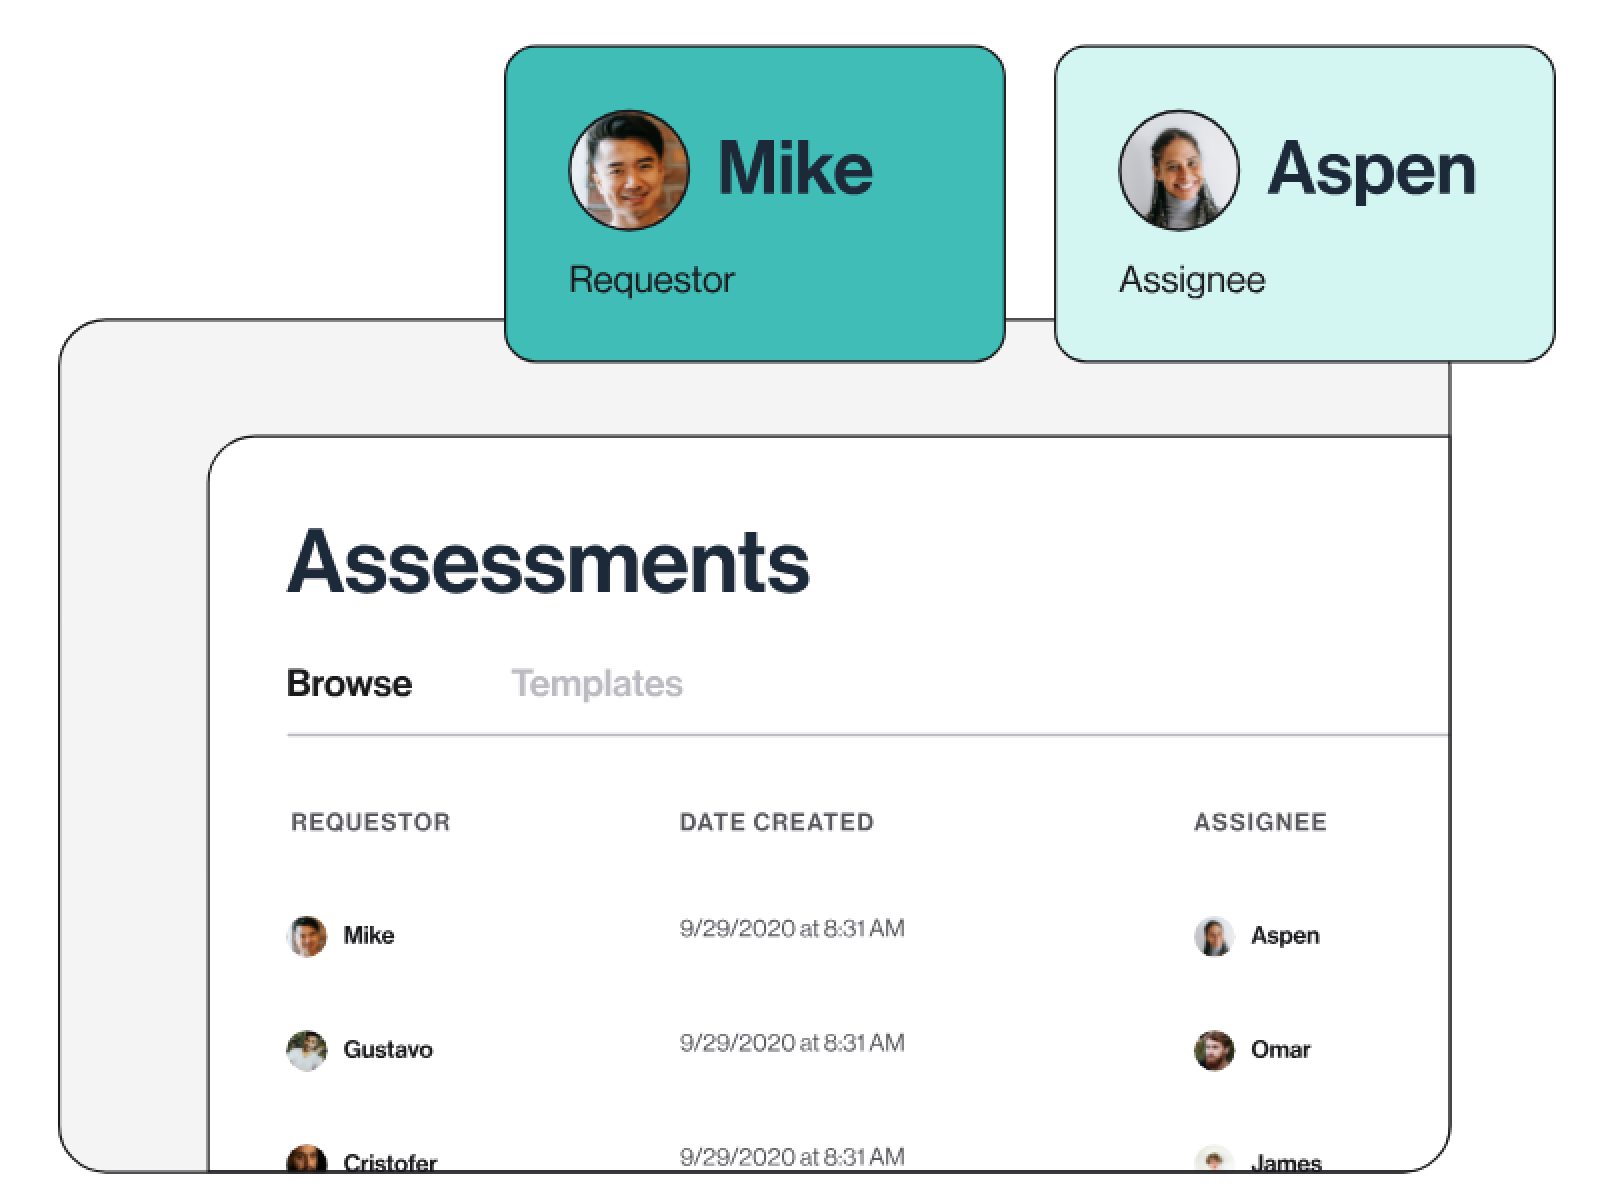 An illustration showing the Assessments dashboard in Transcend. In the foreground, two avatars represent a requestor and an assignnee.